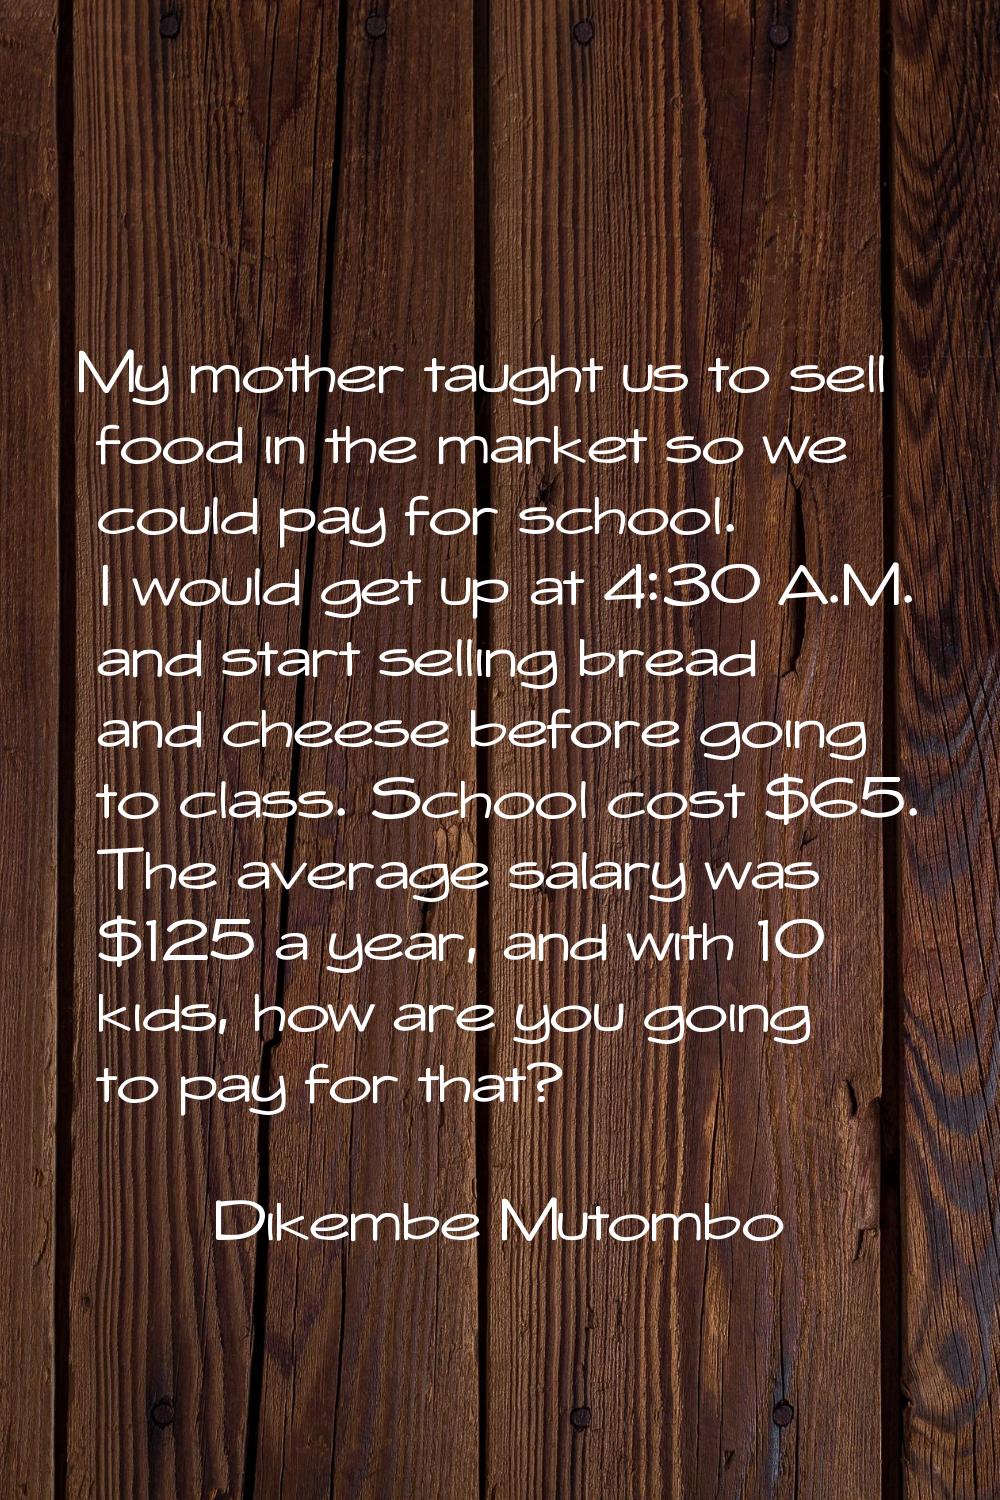 My mother taught us to sell food in the market so we could pay for school. I would get up at 4:30 A